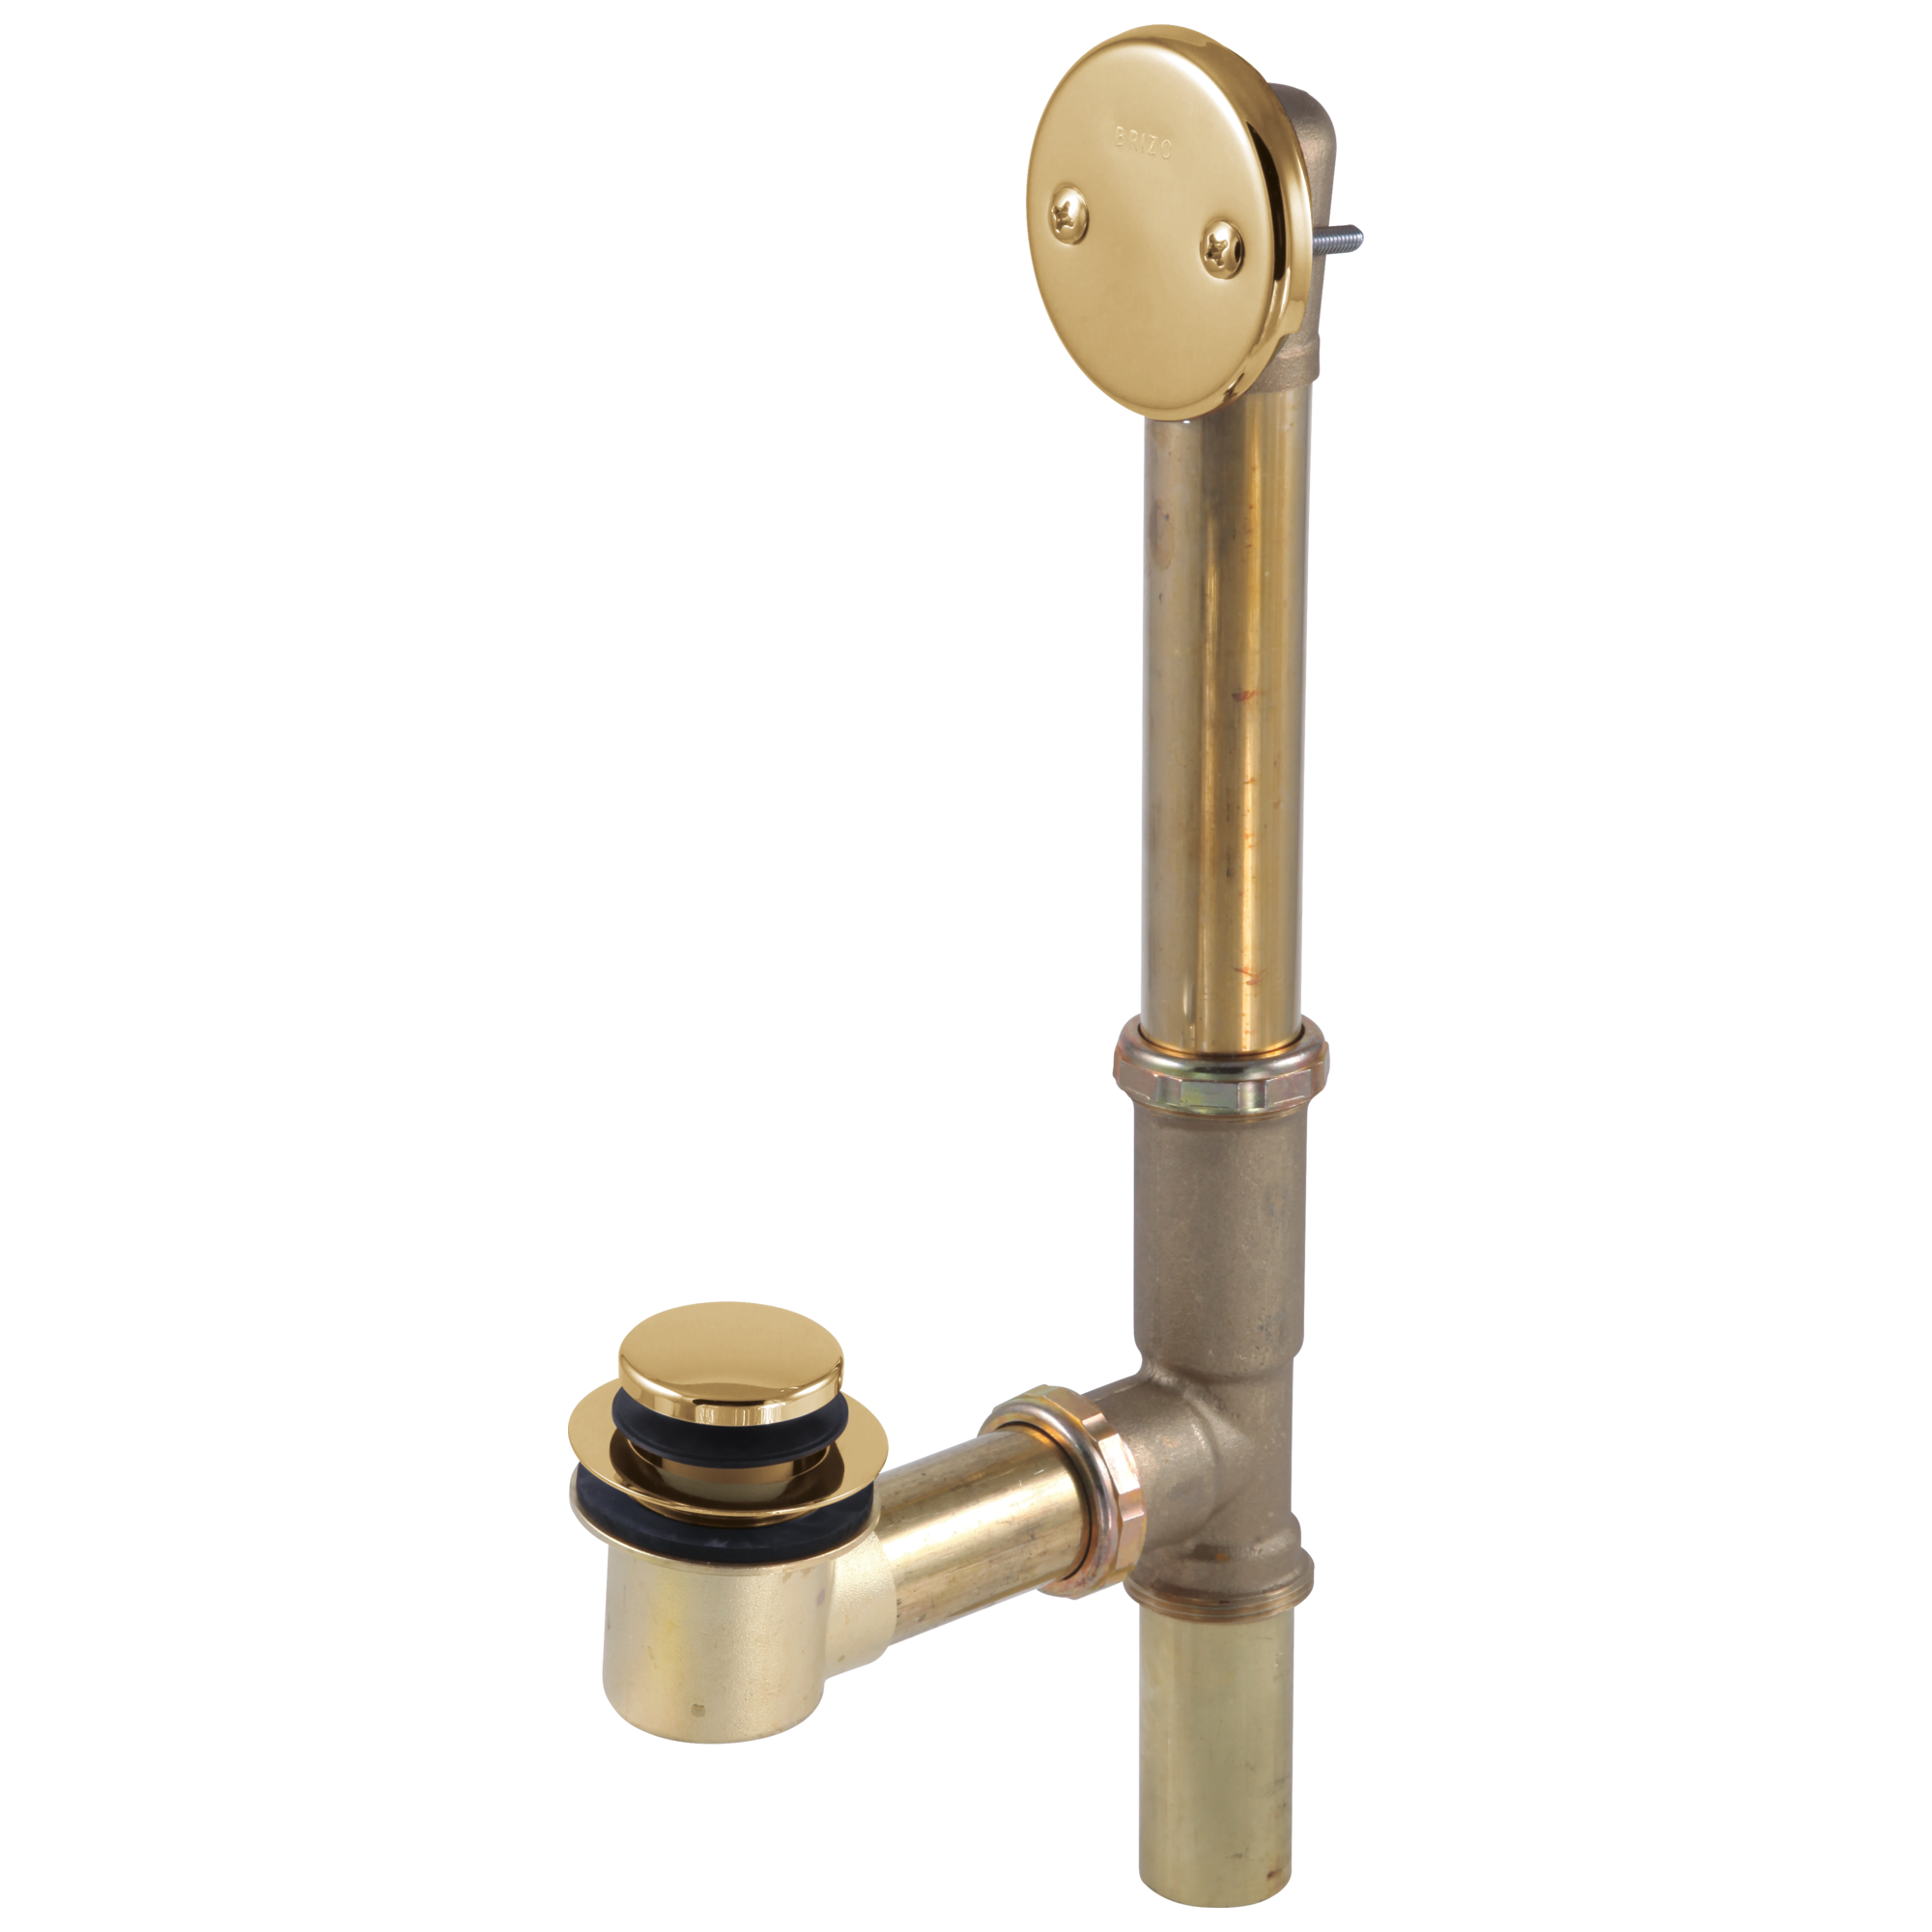 Toe-Operated Tub Drain in Polished Gold